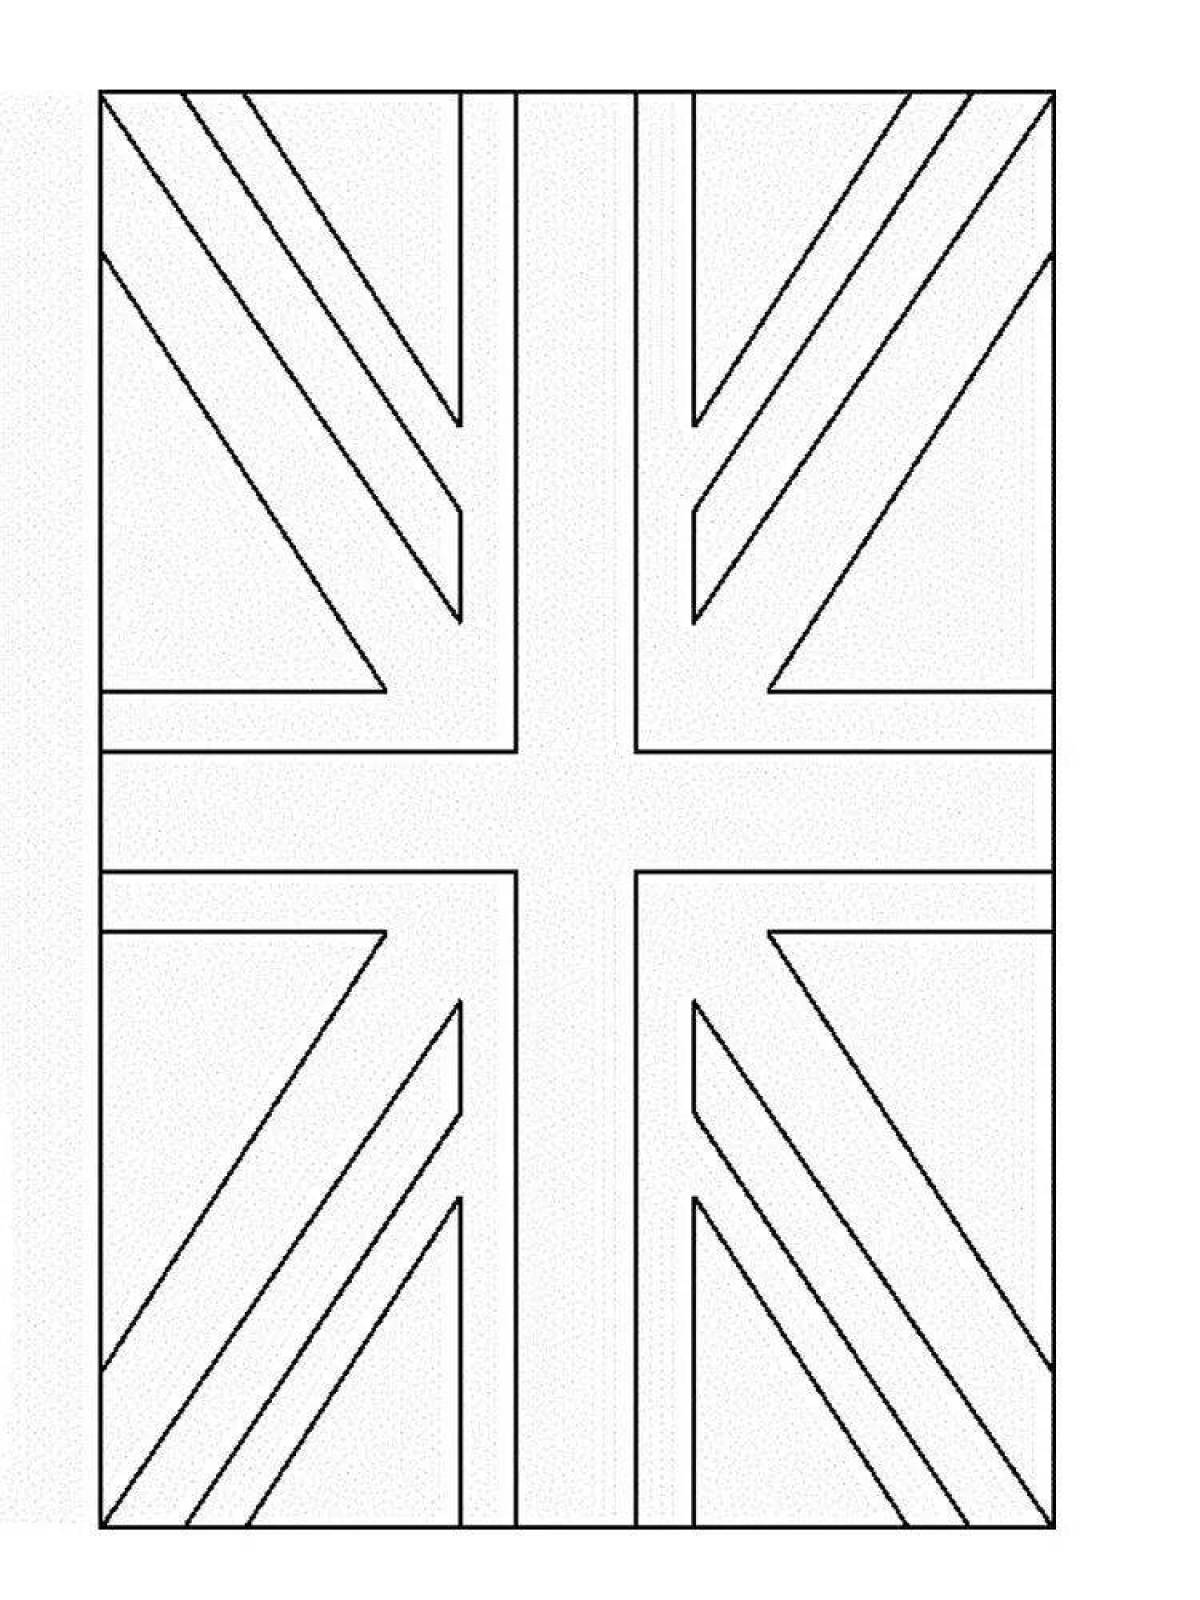 Awesome england flag coloring page